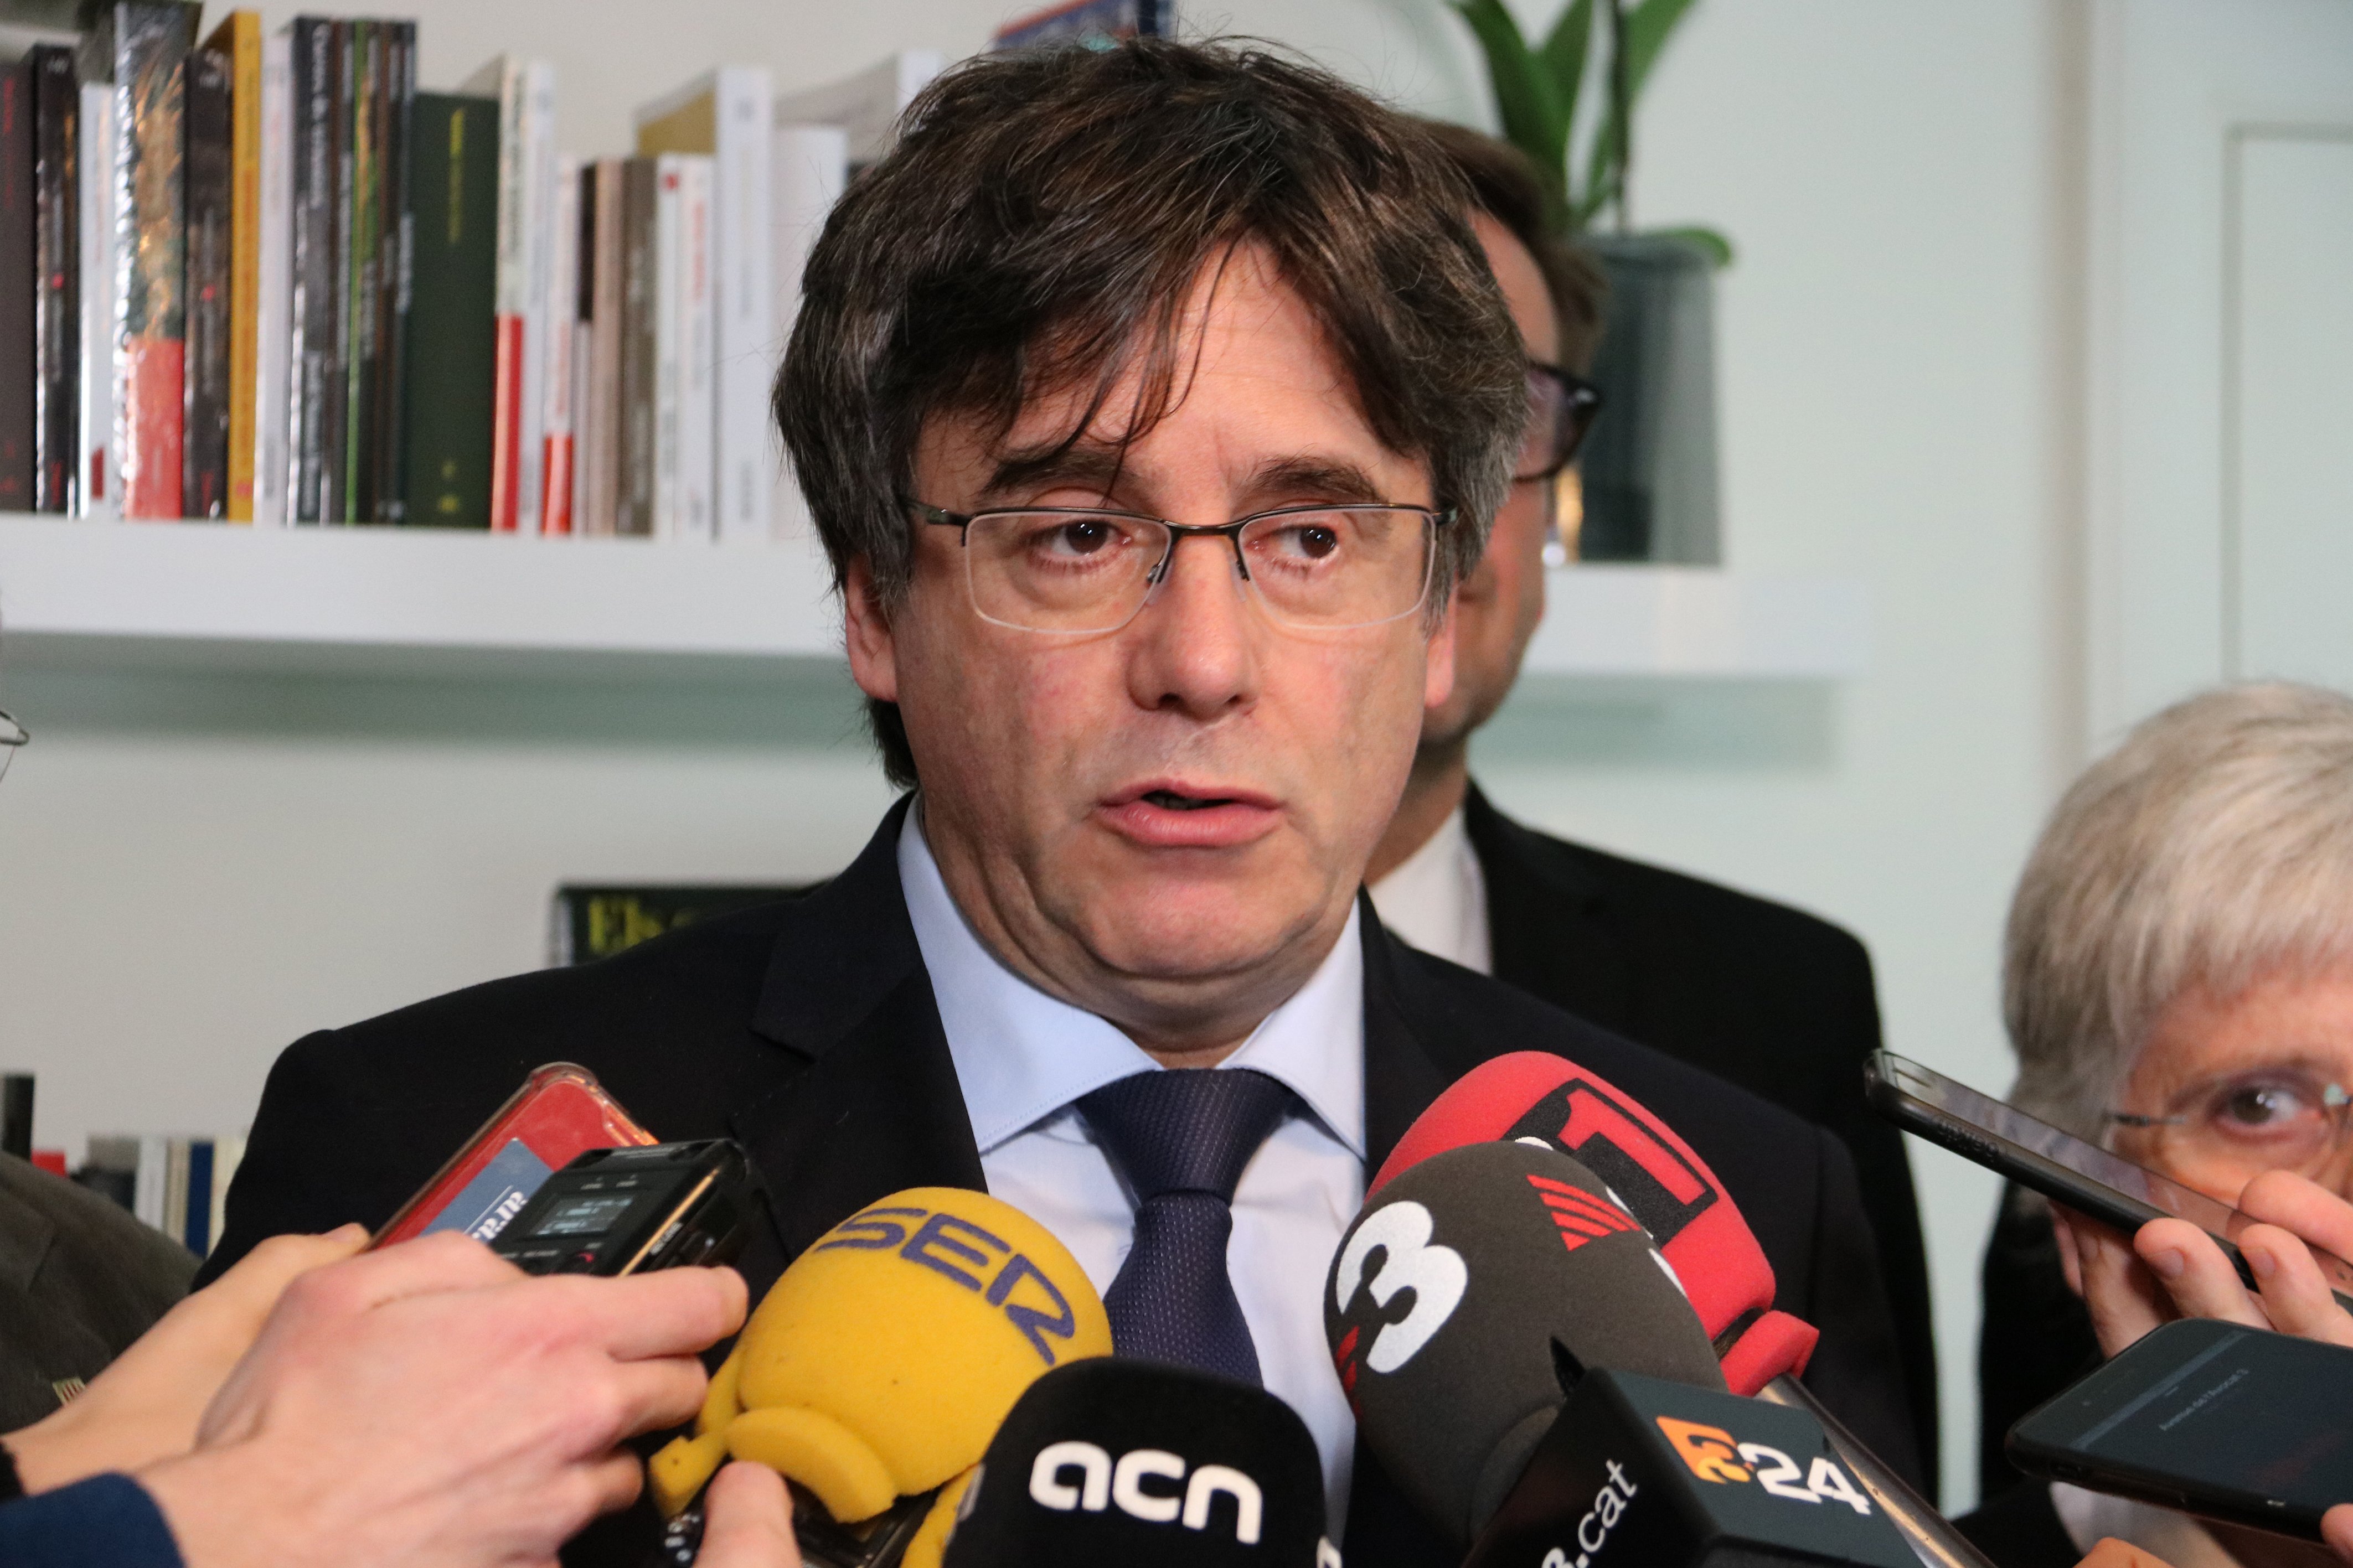 Puigdemont: Spanish response to Mexico’s letter on colonial issue was “atrocious"